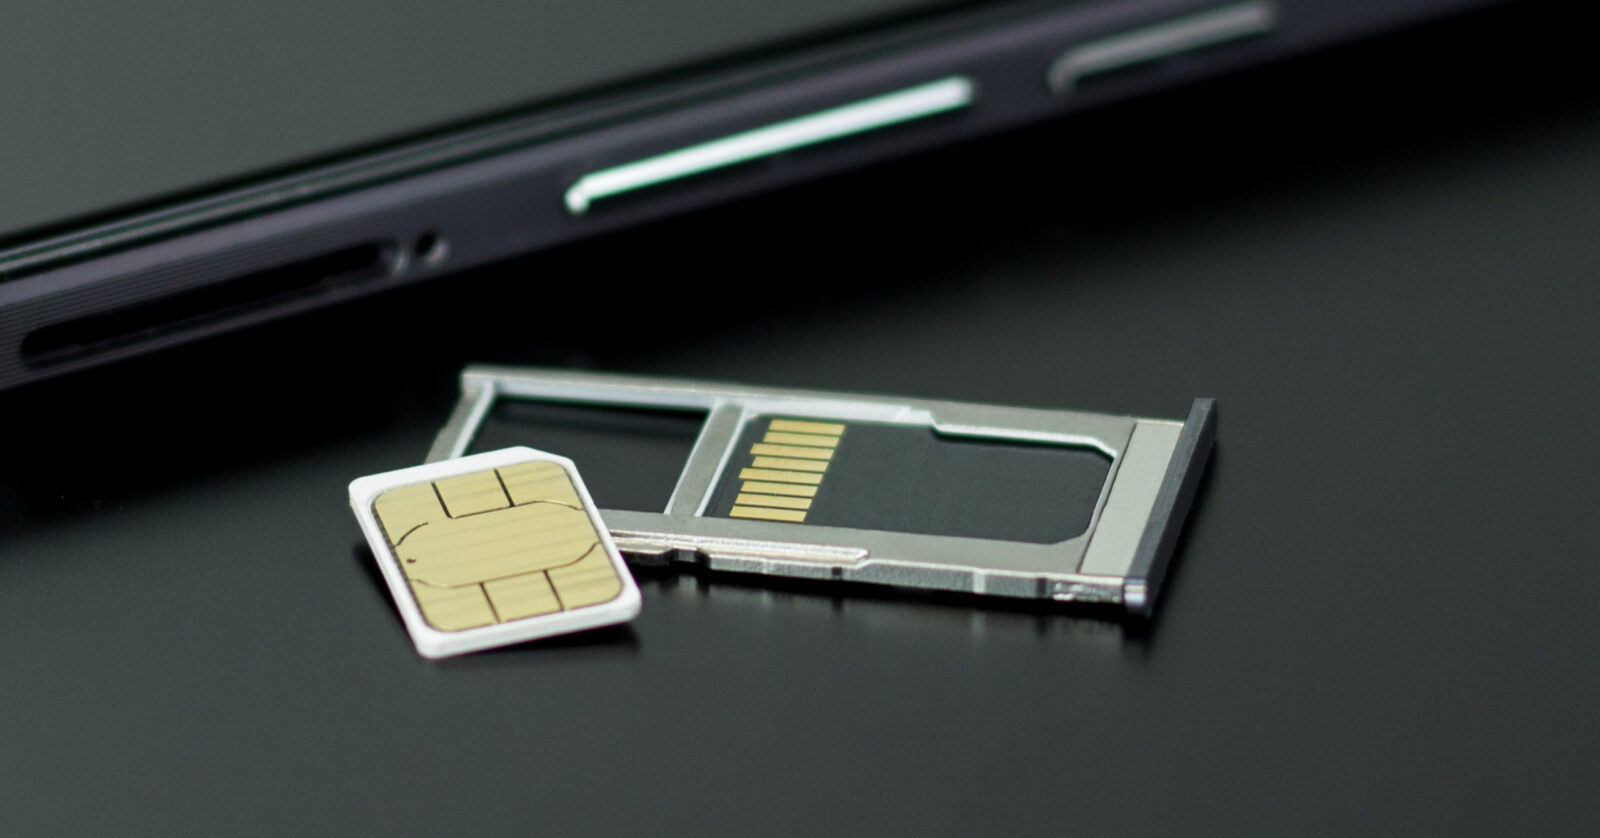 understanding-the-purpose-of-sim-card-messages